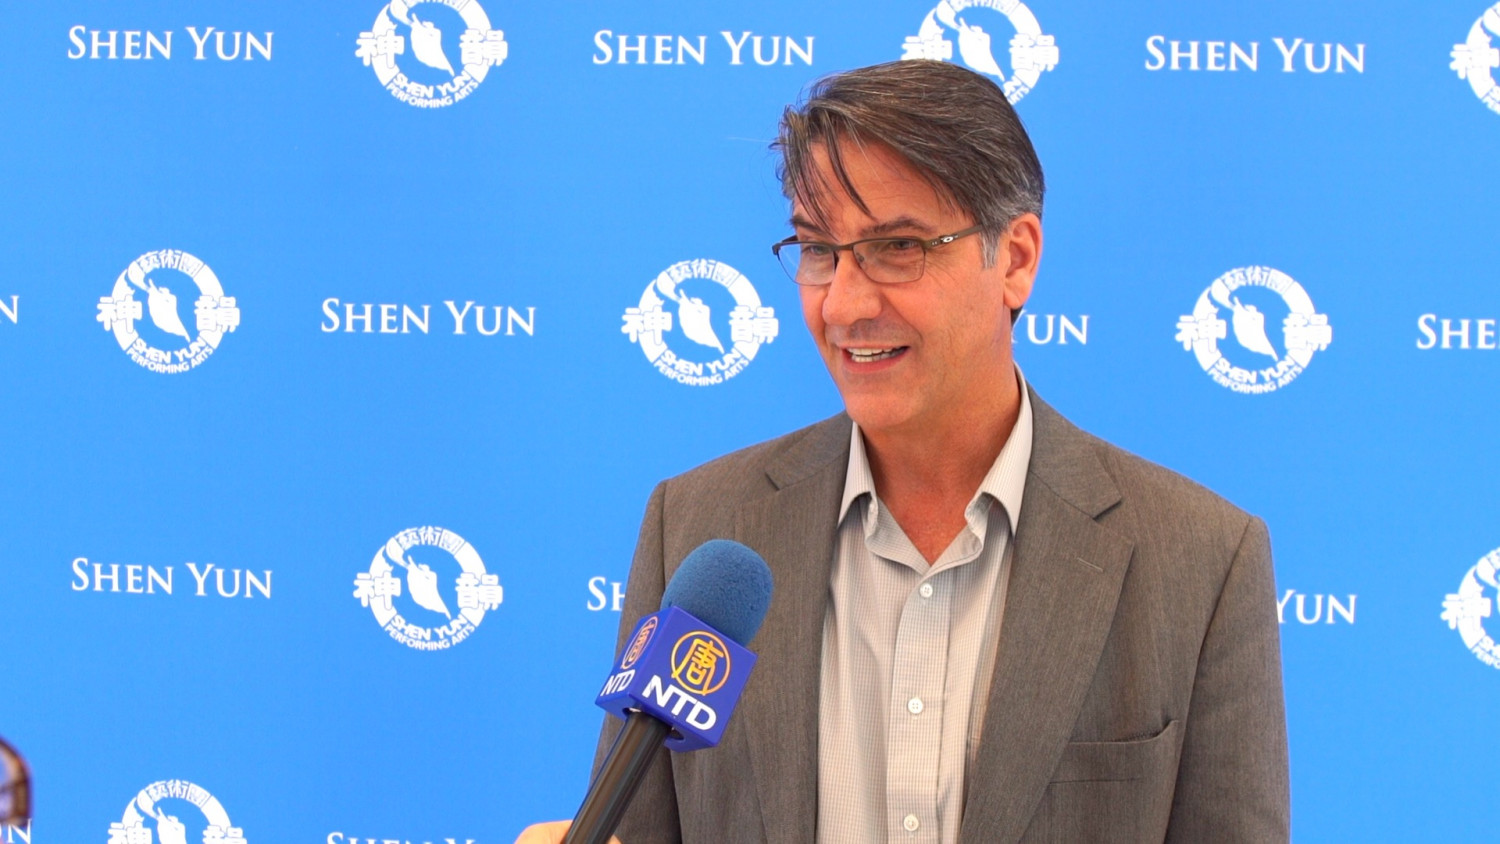 Mayor Admires Shen Yun’s Modesty and Virtue